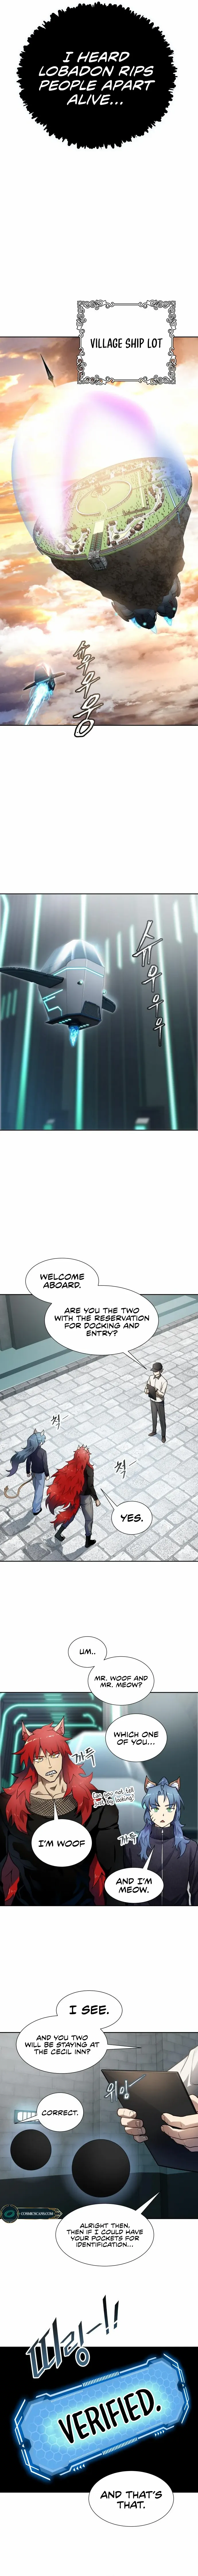 Tower Of God Chapter 581 Tower of God Ch.581 Page 18 - Mangago